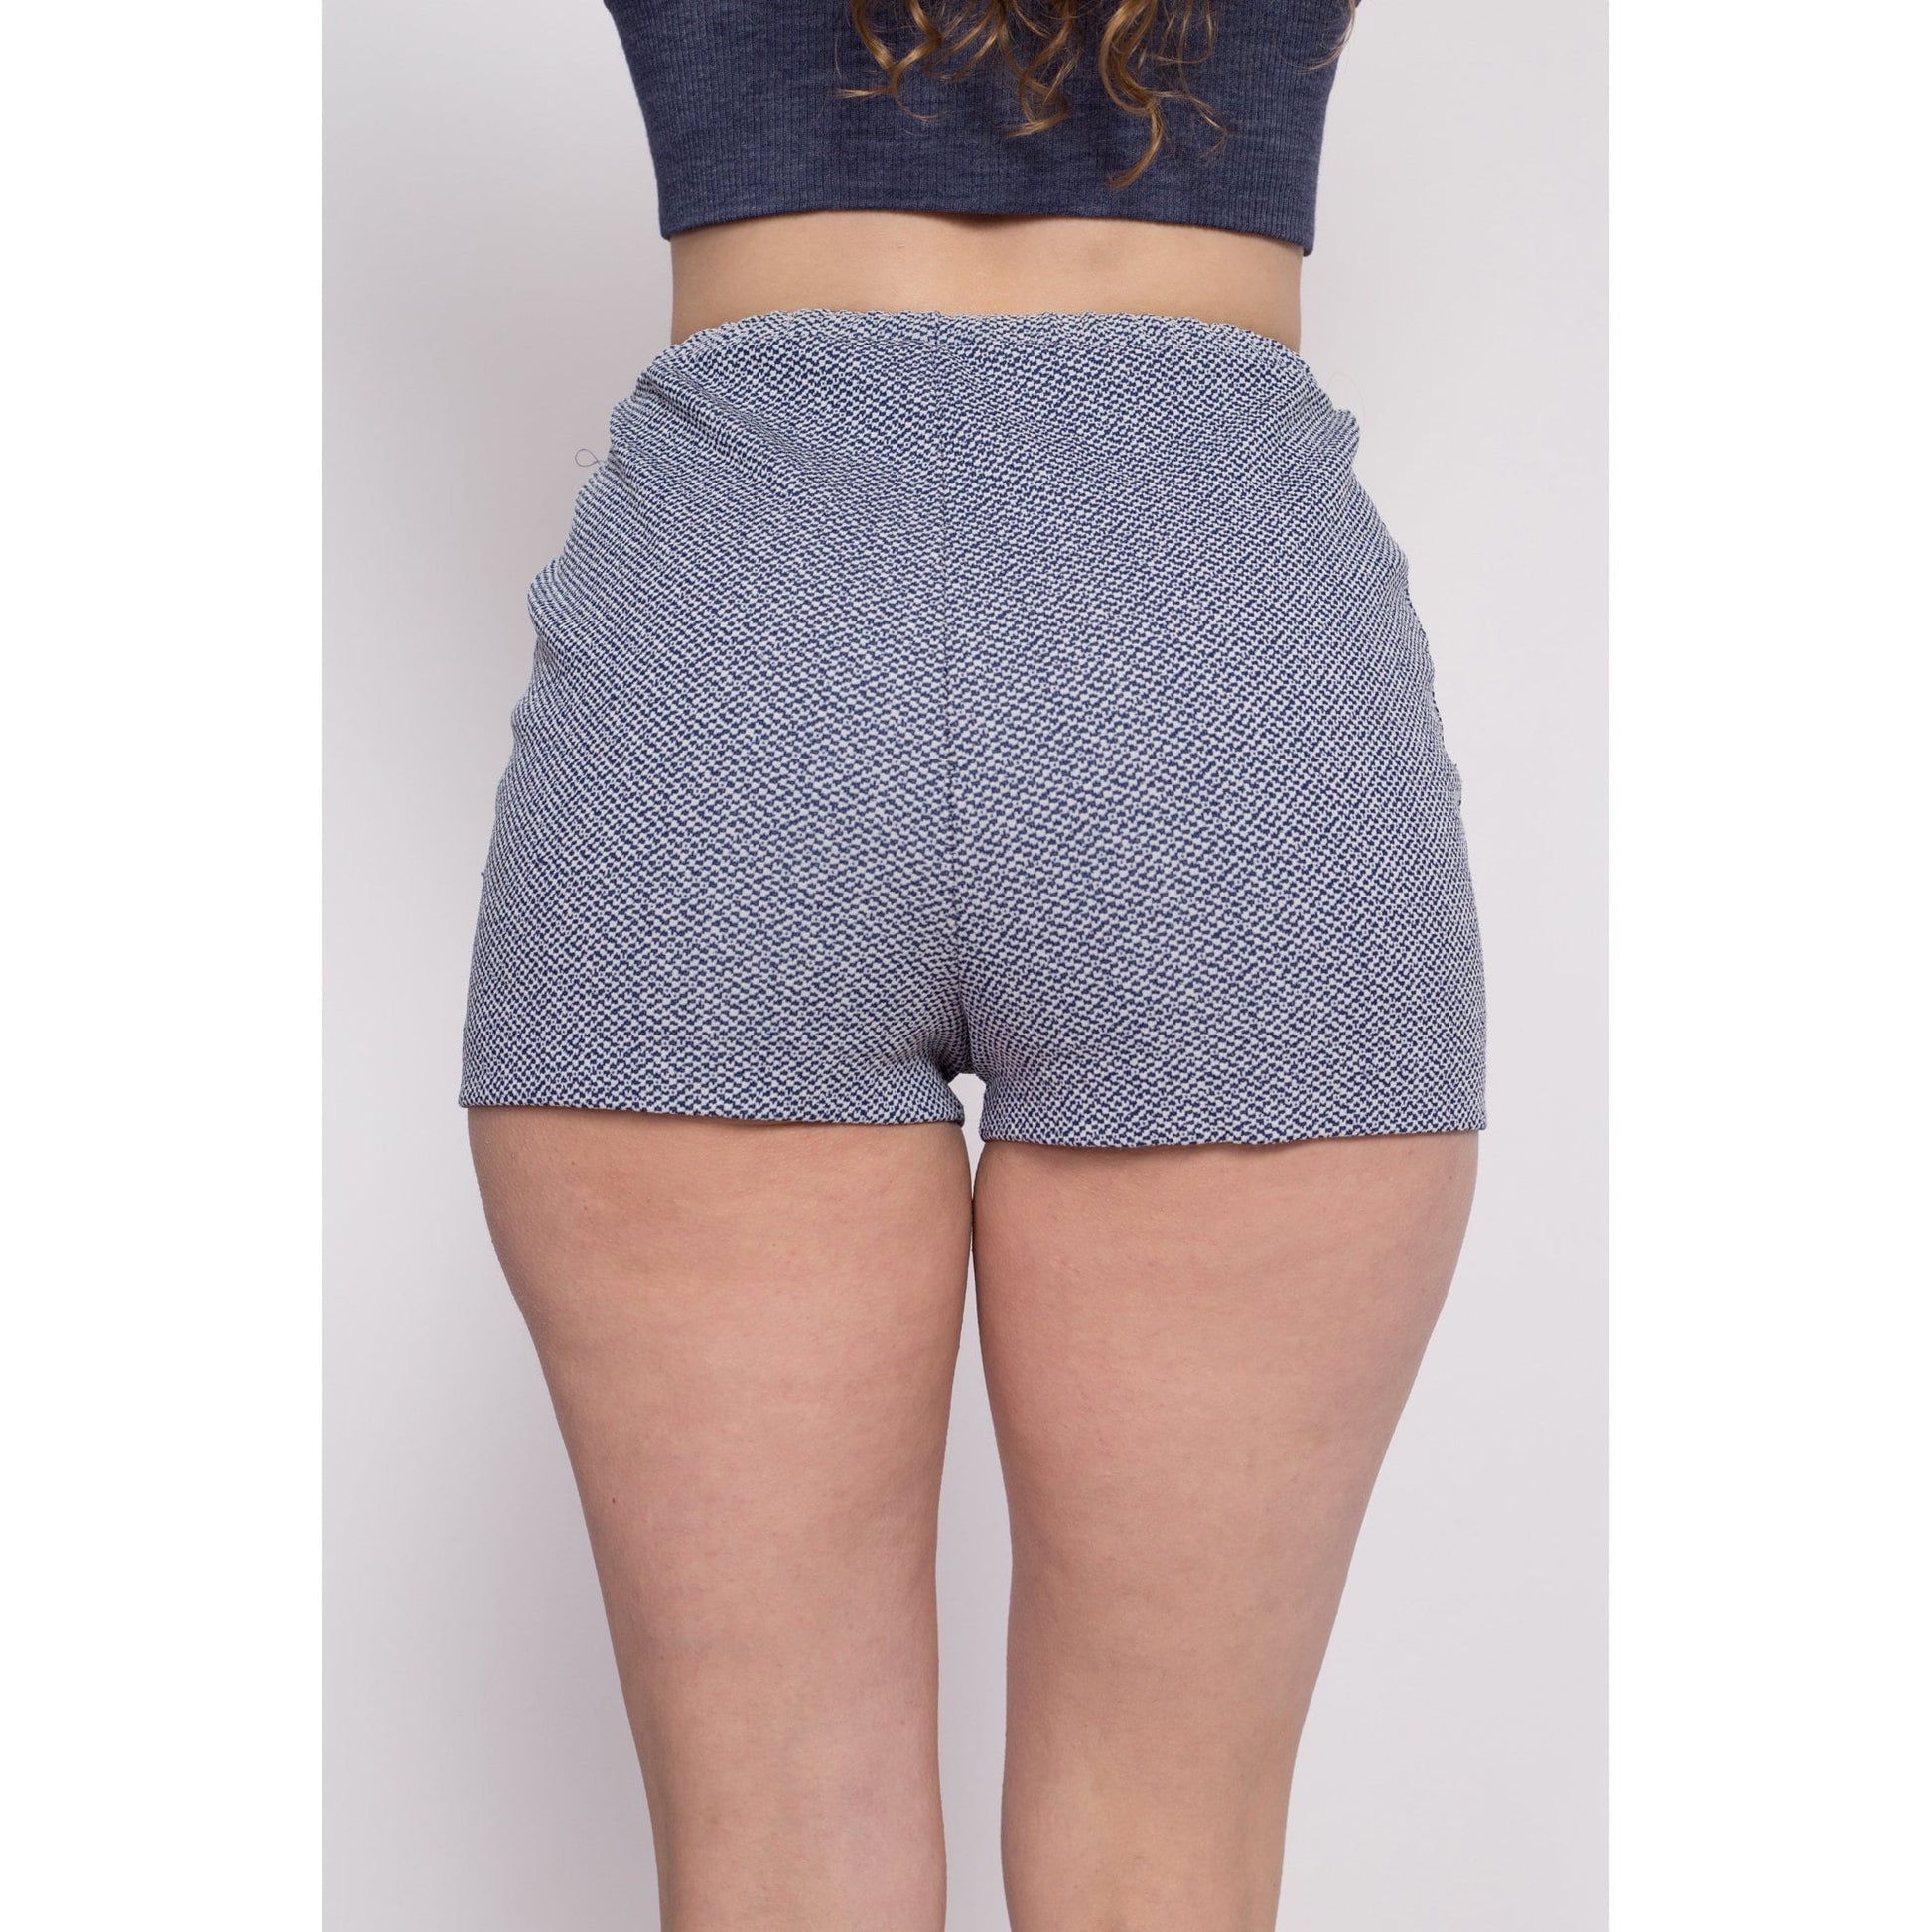 70s Blue High Waisted Hot Pants - Small – Flying Apple Vintage